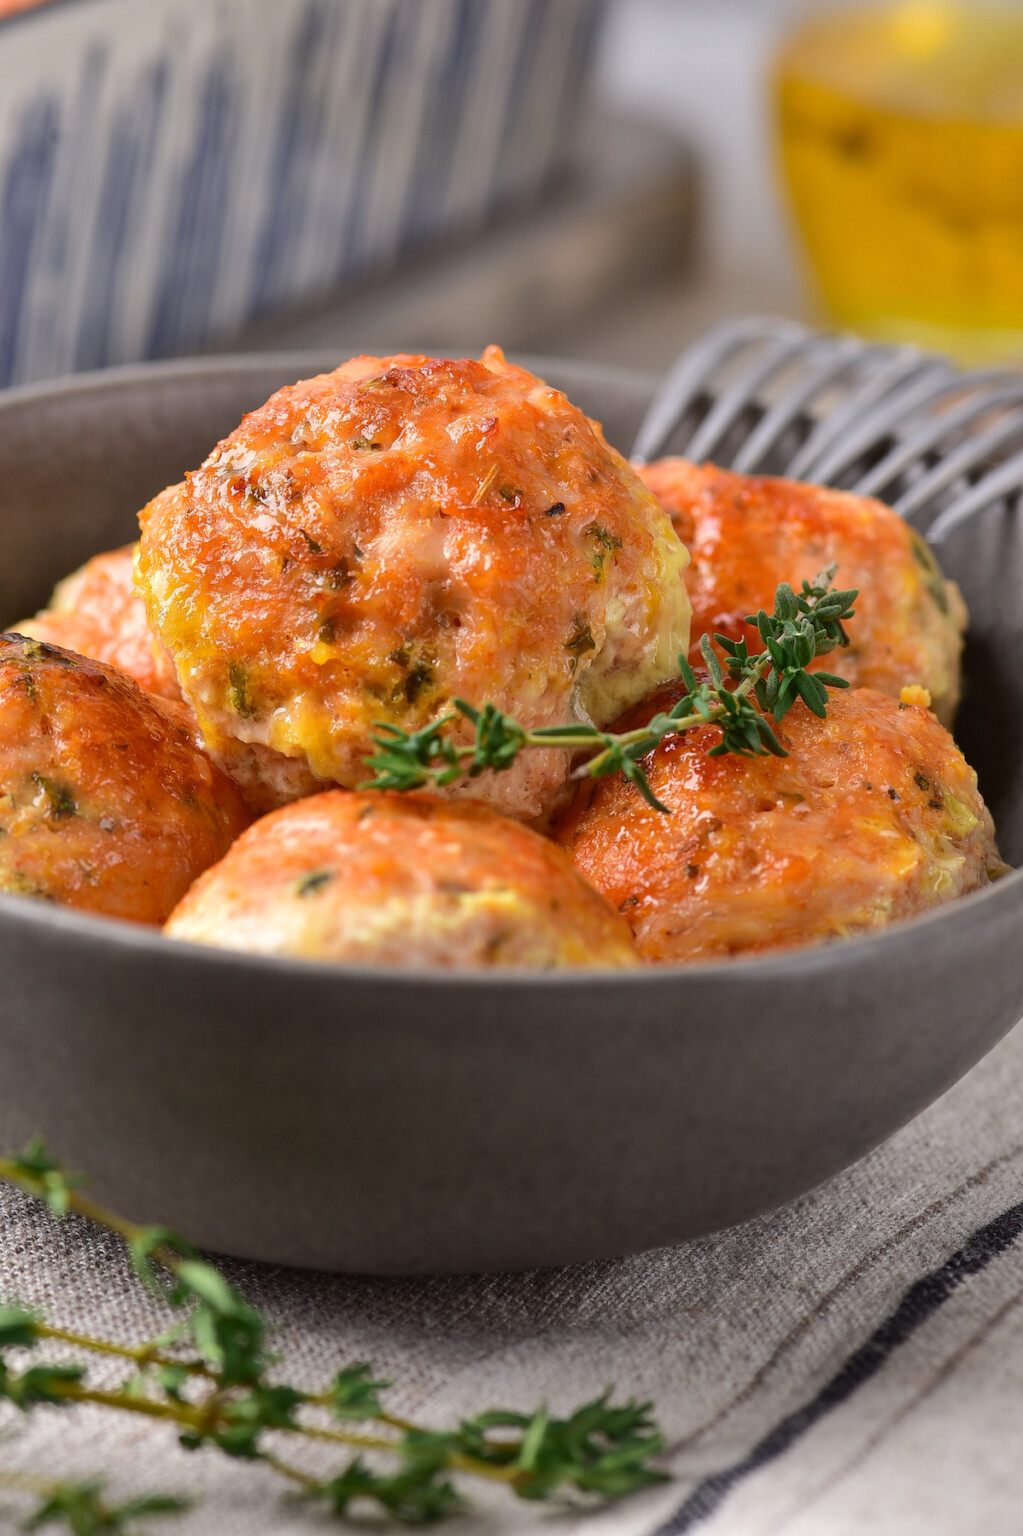 Chicken Meatballs - Recipes From A Pantry